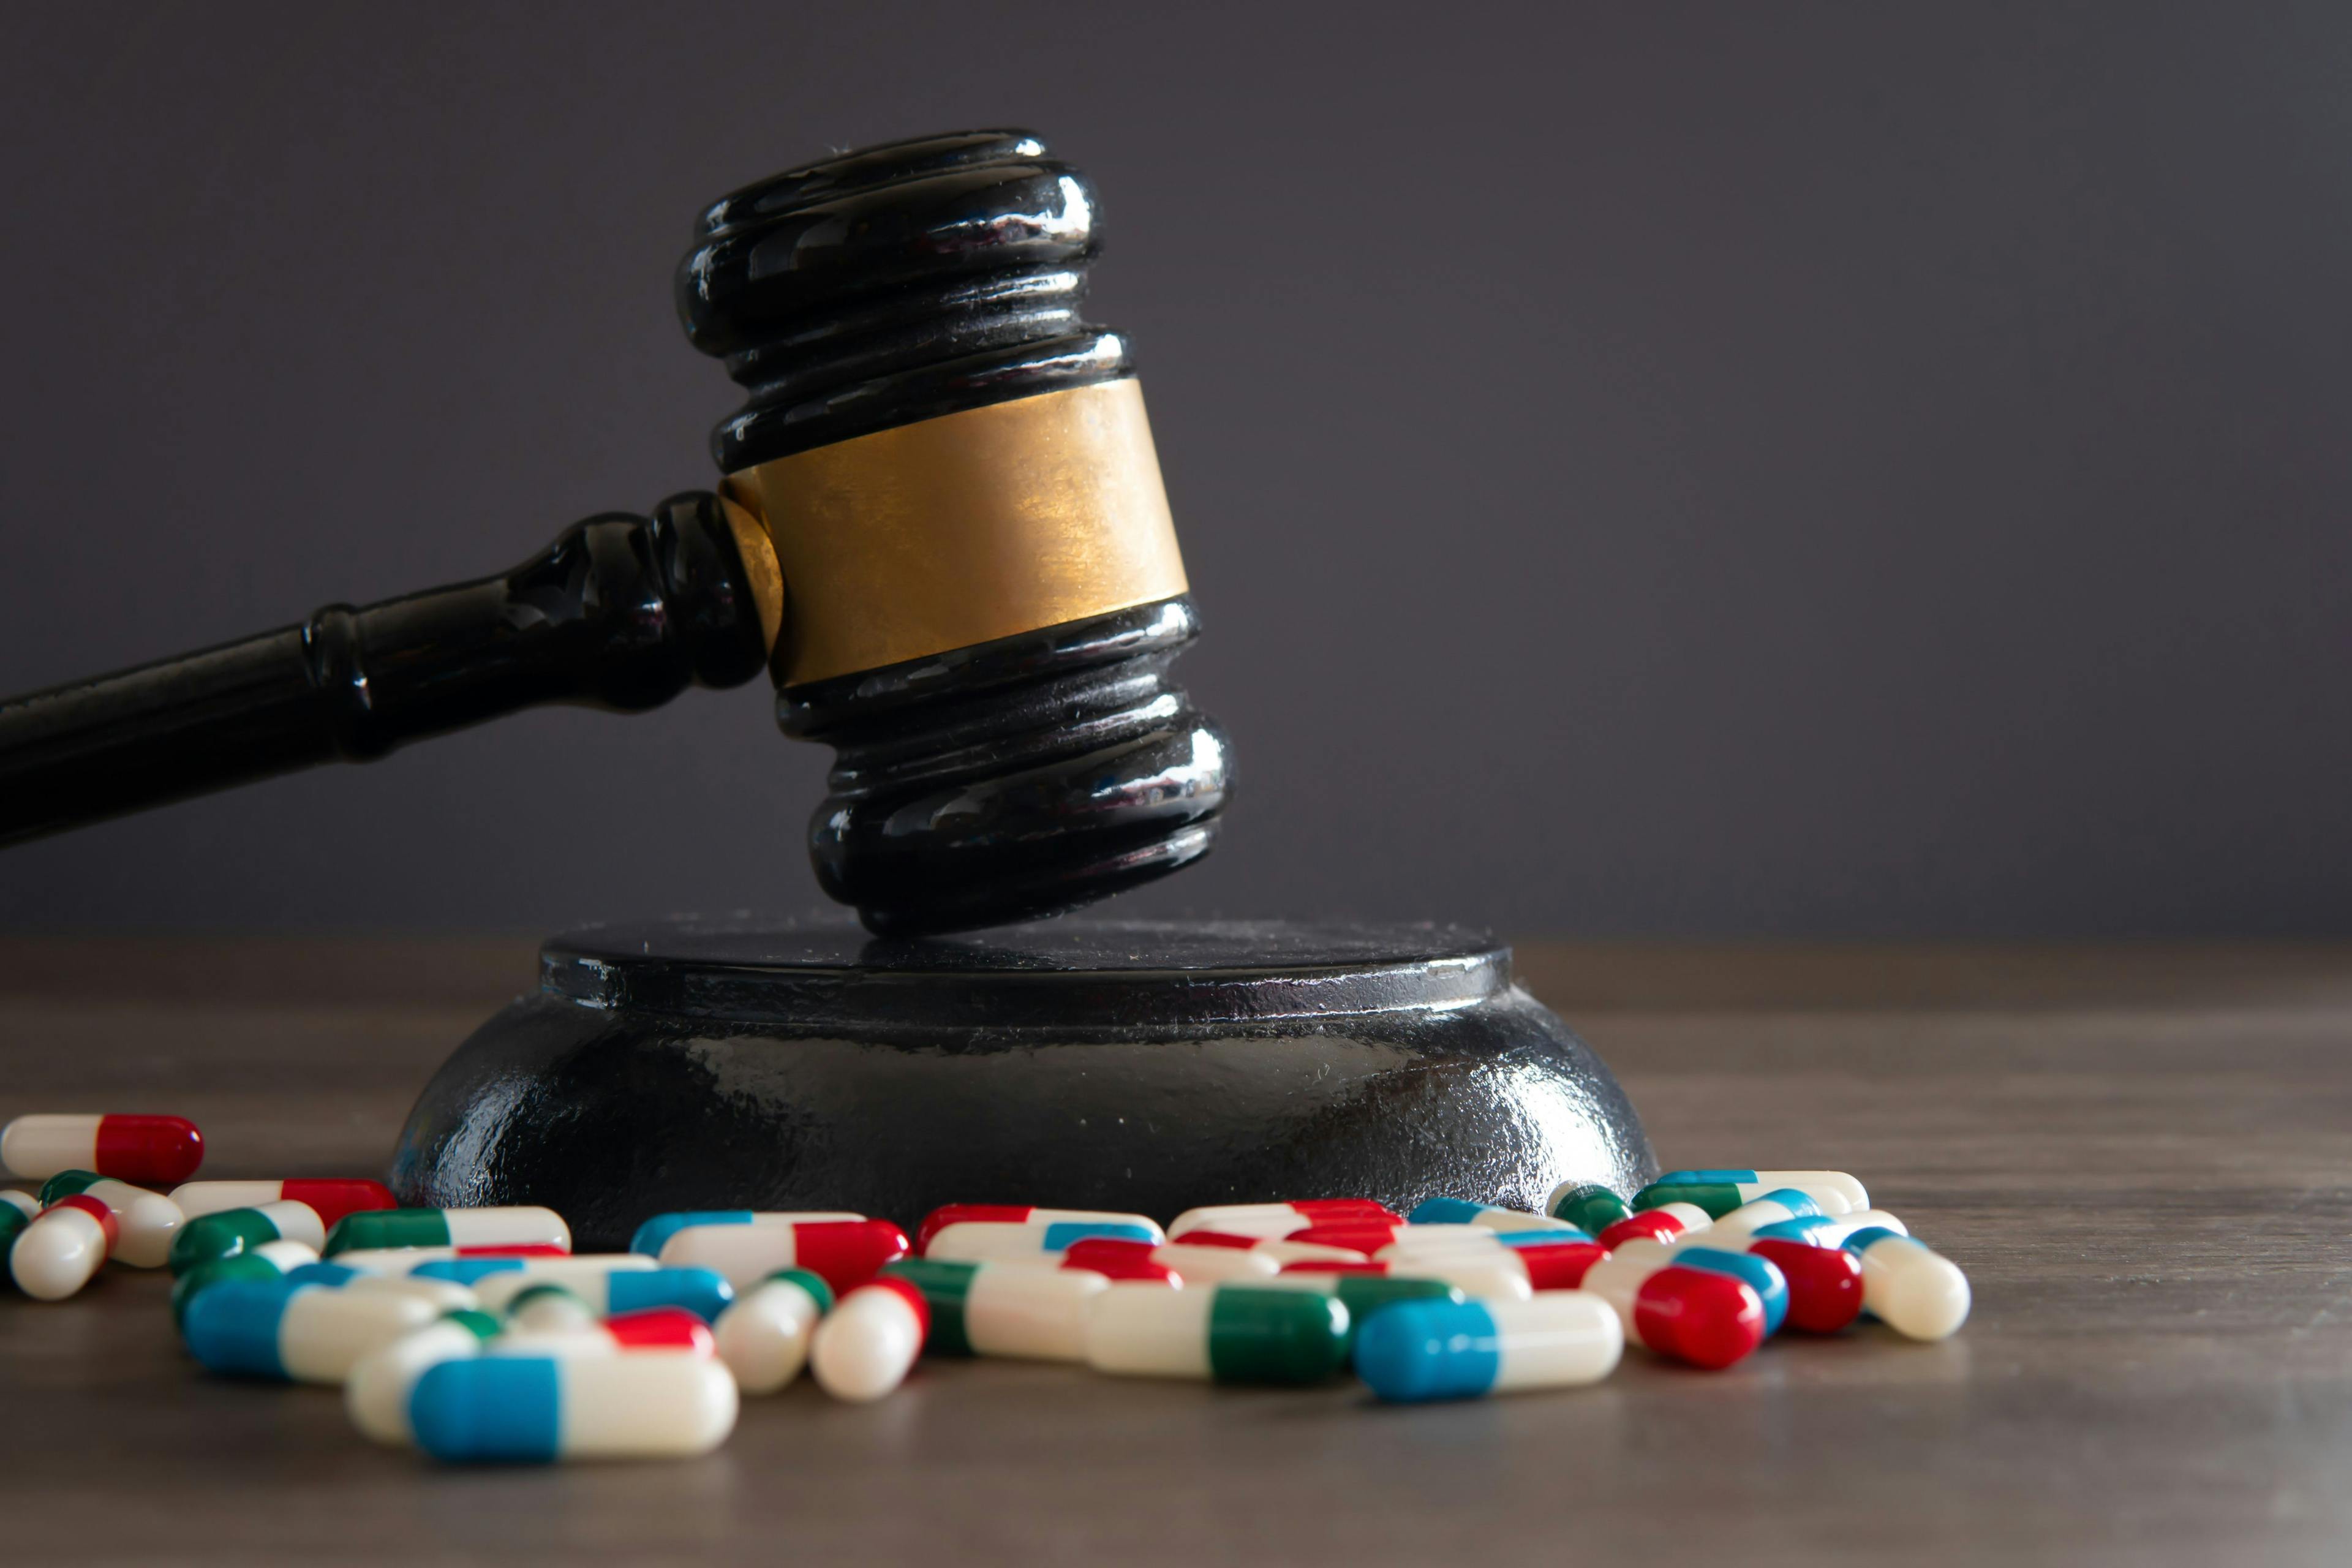 Closeup image of colorful medicine pills and judge gavel on table. Medical law concept - Image credit: izzuan | stock.adobe.com